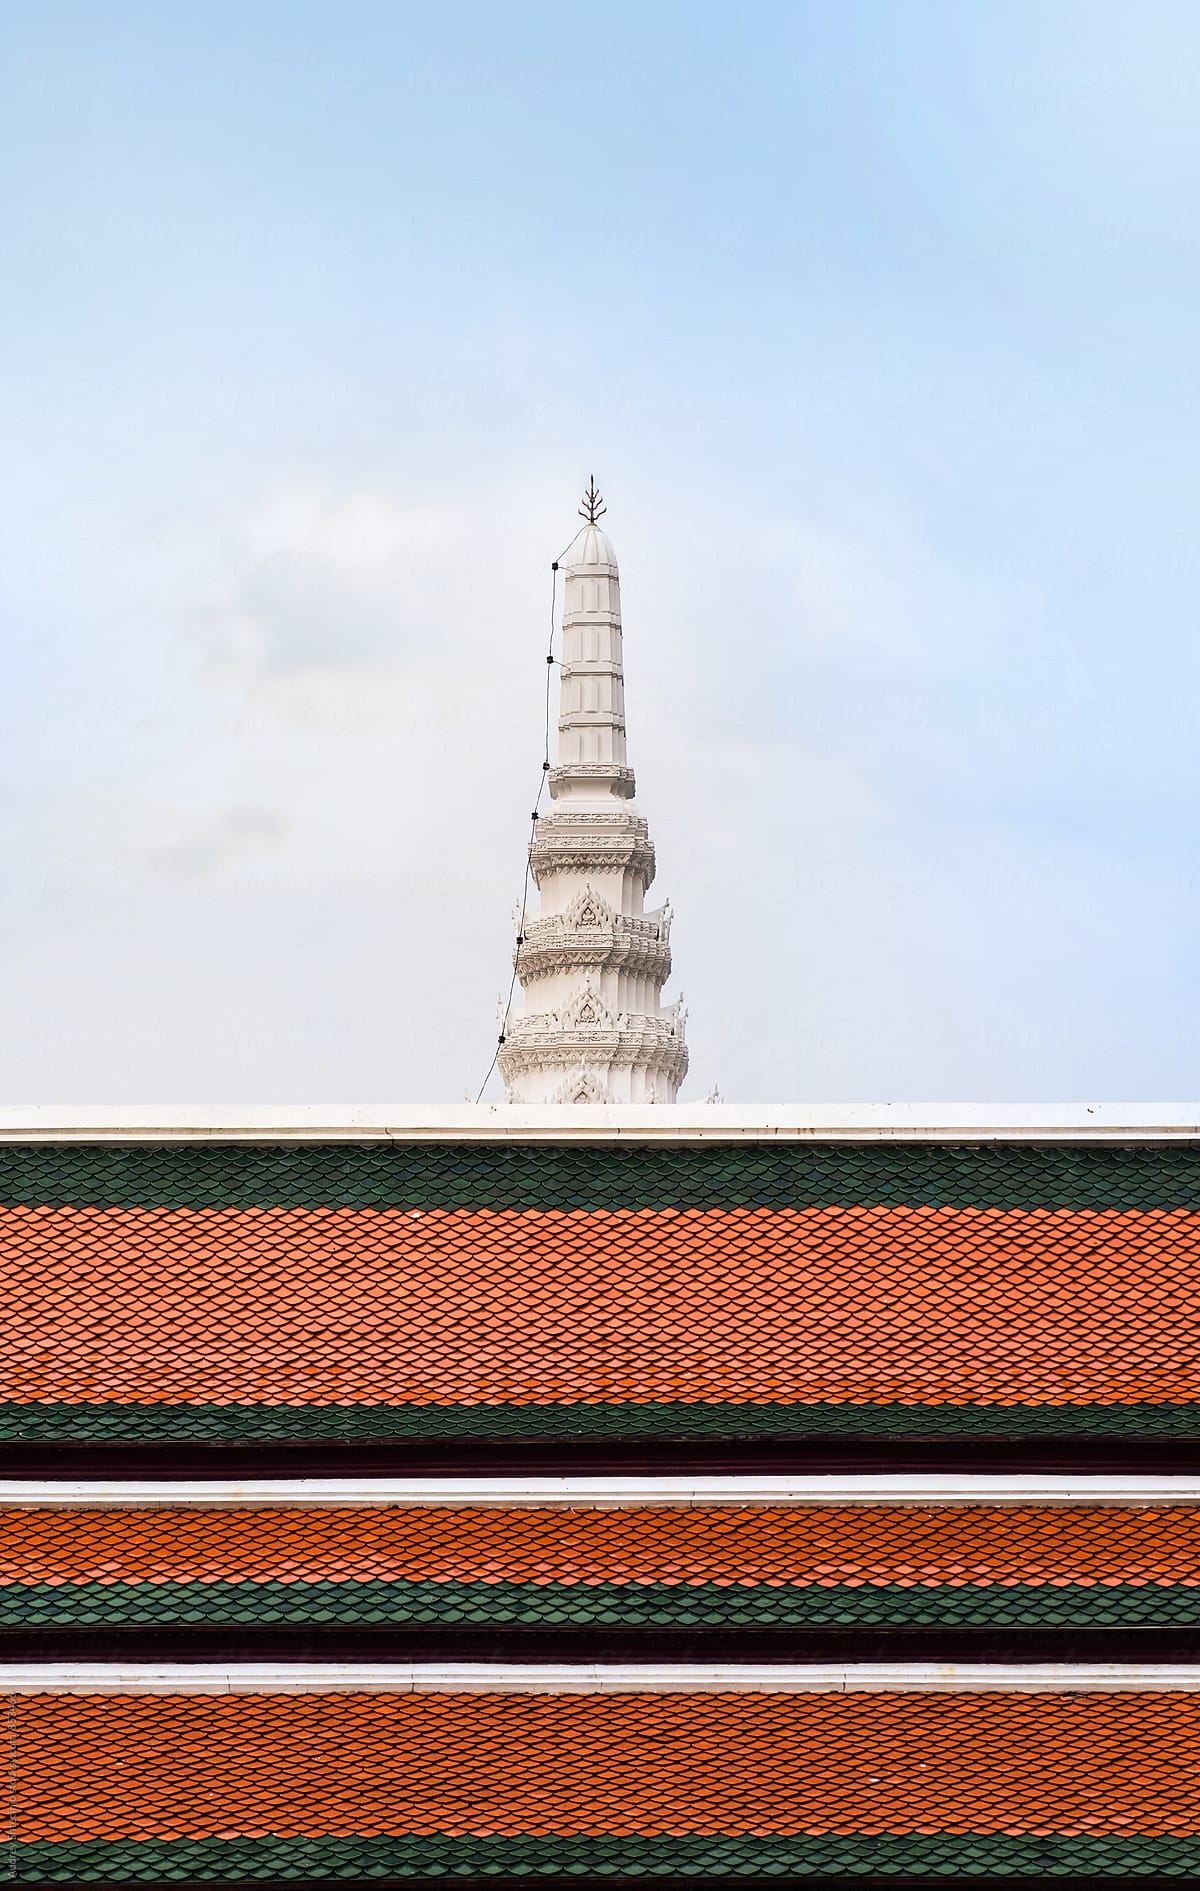 Colorful roofs with white monument/tower temple in background /Bangkok/Thailand